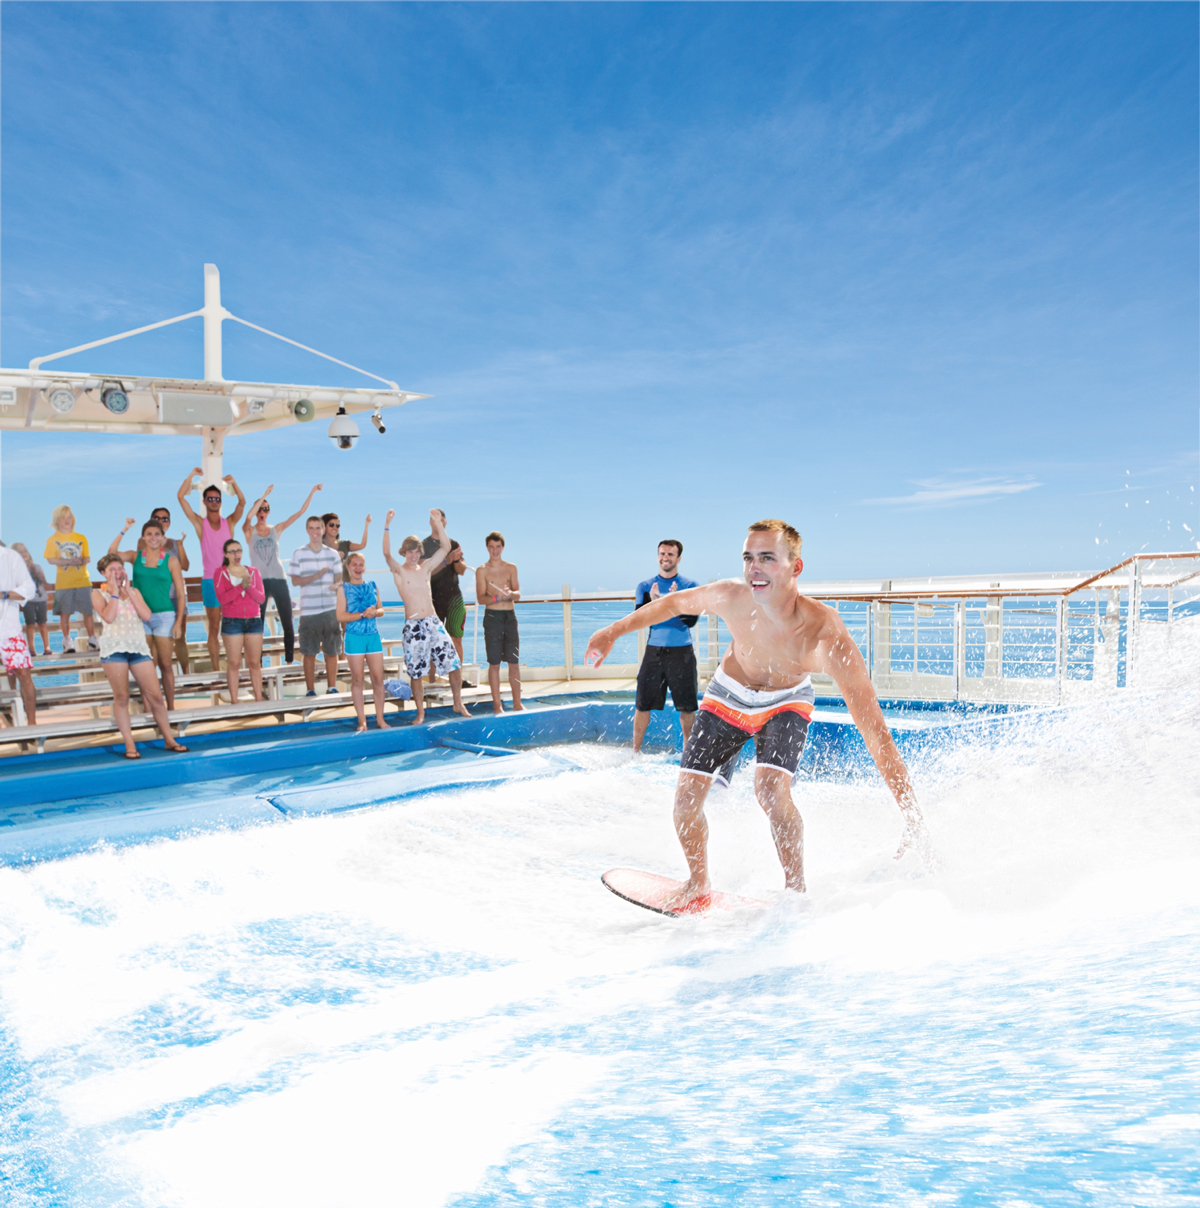 Includes entertainment, standard meals, onboard activities, Winspire booking + concierge service, and MORE!